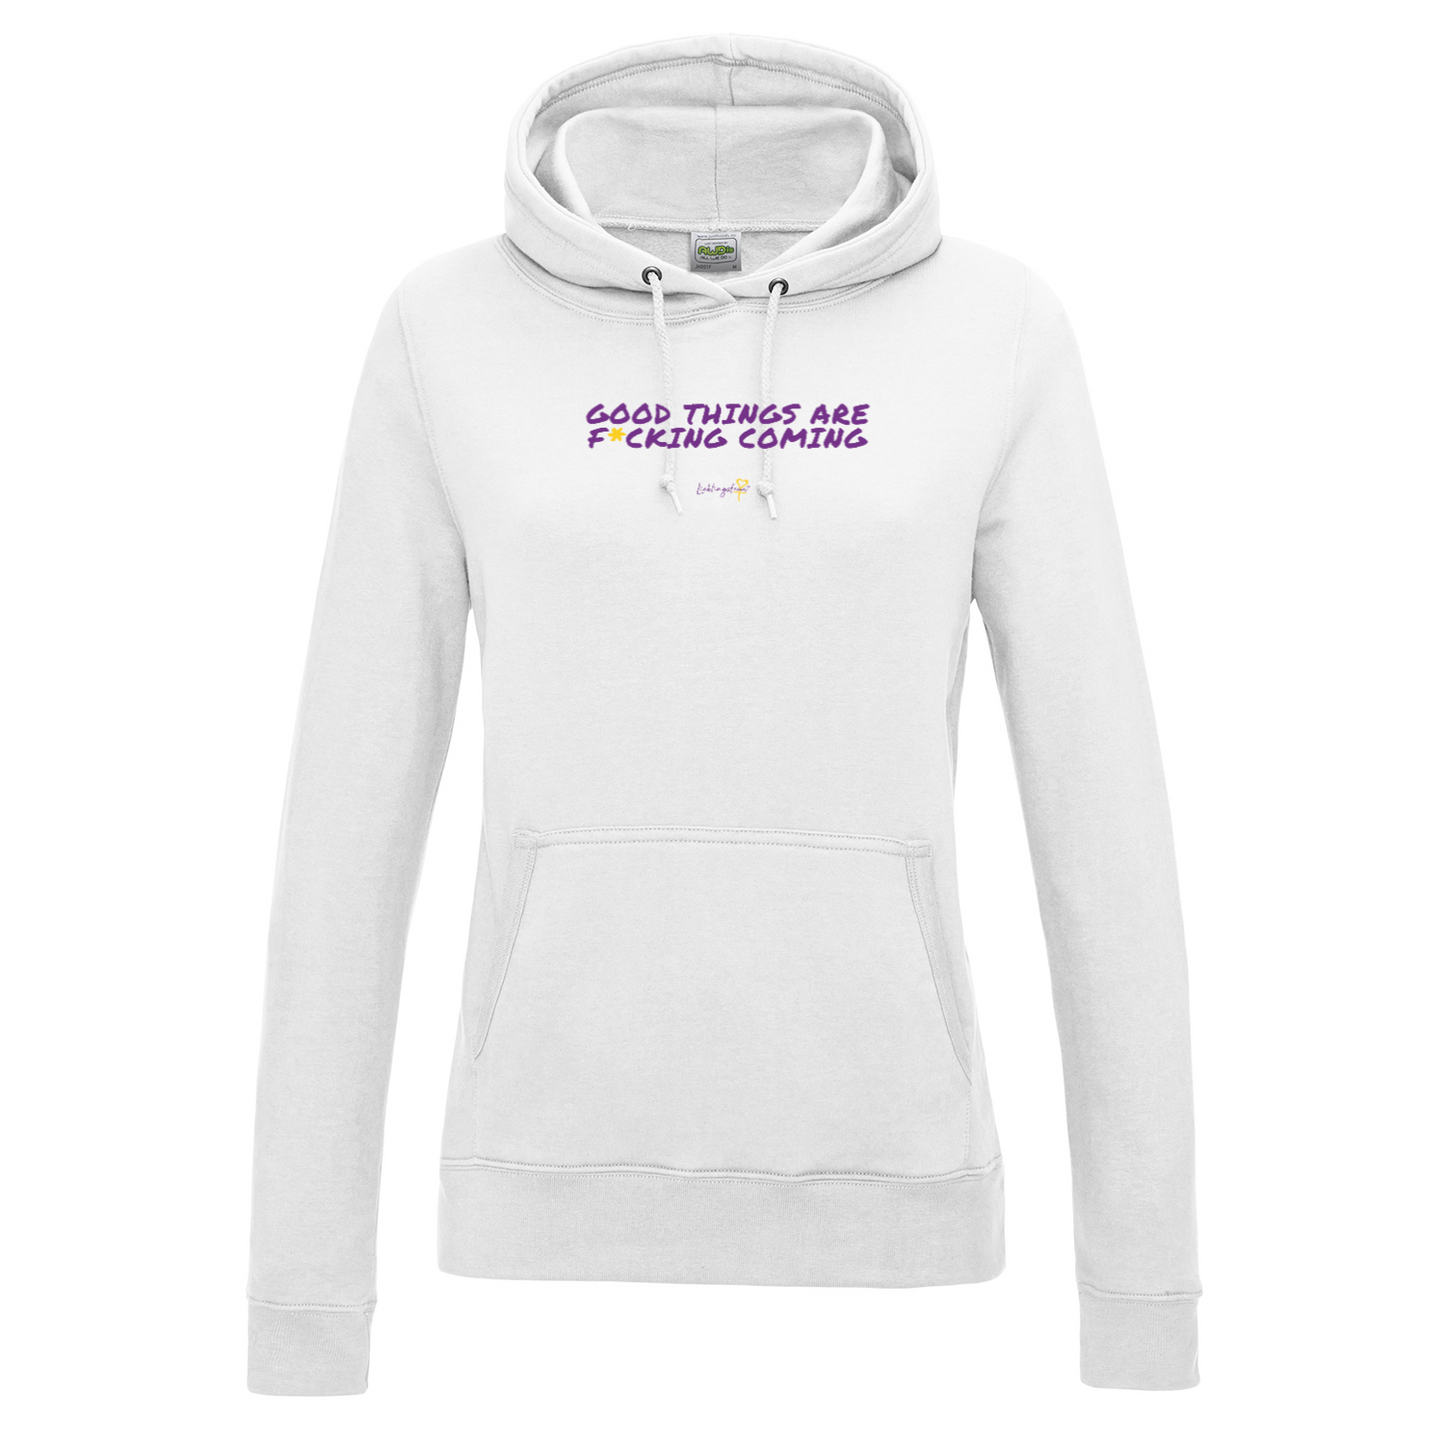 Good things are f*cking coming HOODIE